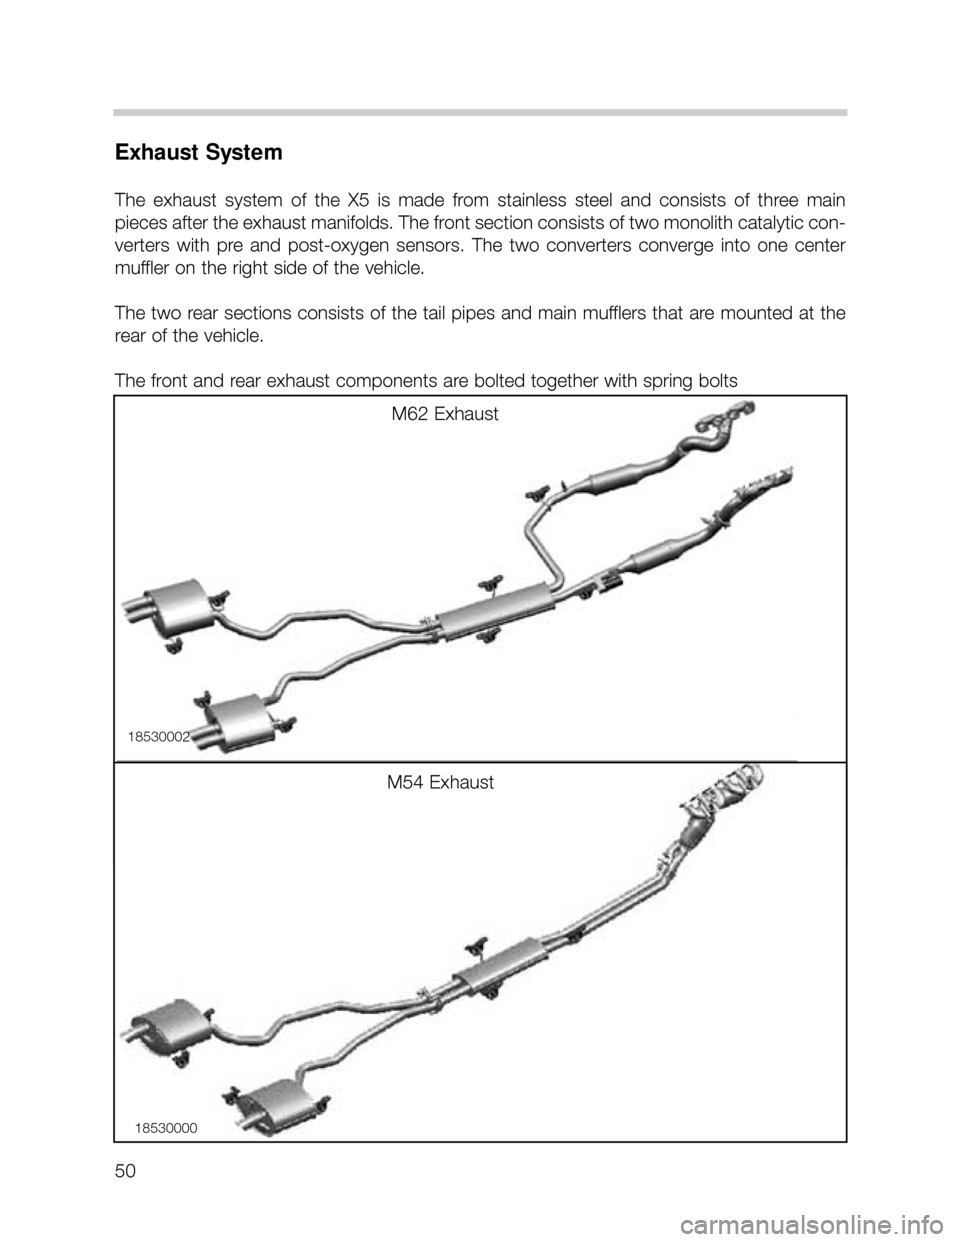 BMW X5 2000 E53 Workshop Manual 50
Exhaust System
The  exhaust  system  of  the  X5  is  made  from  stainless  steel  and  consists  of  three  main
pieces after the exhaust manifolds. The front section consists of two monolith cat